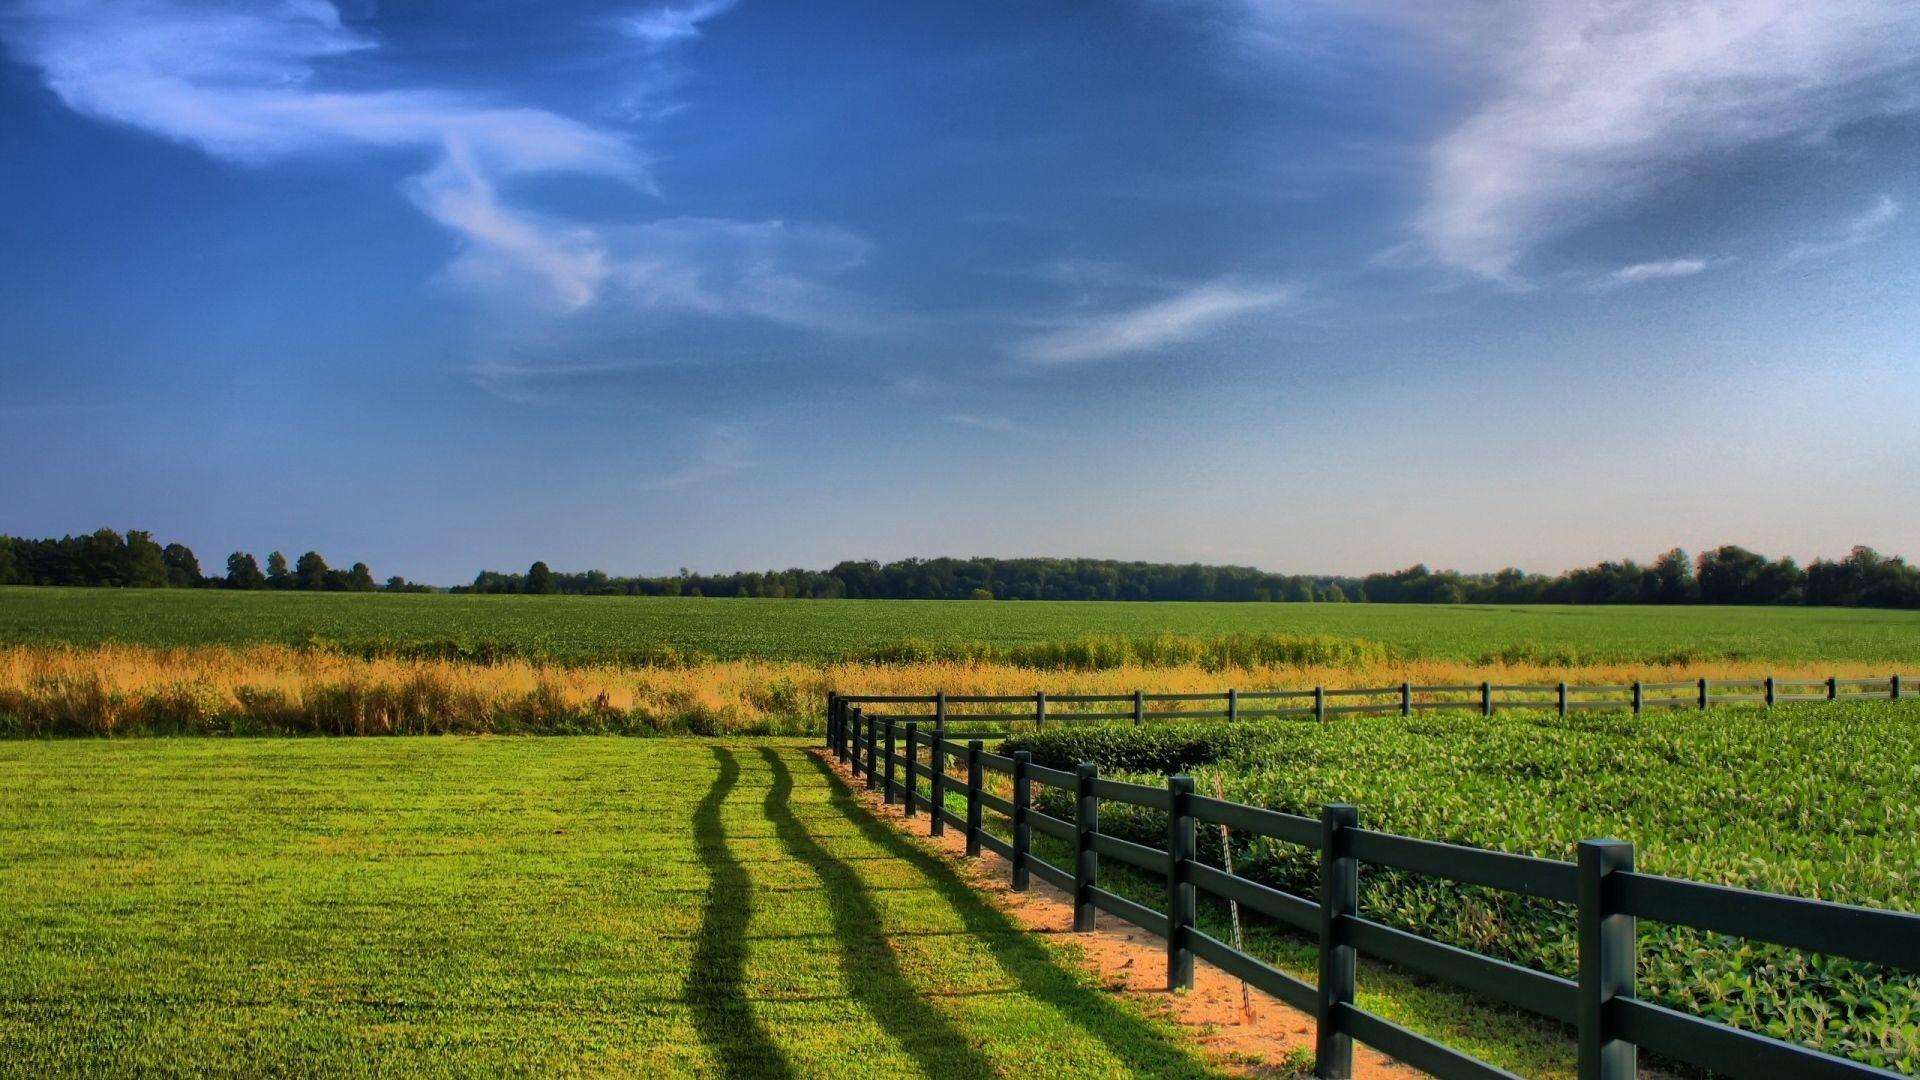 Download wallpaper 1920x1080 fence, fields, greens, agriculture full